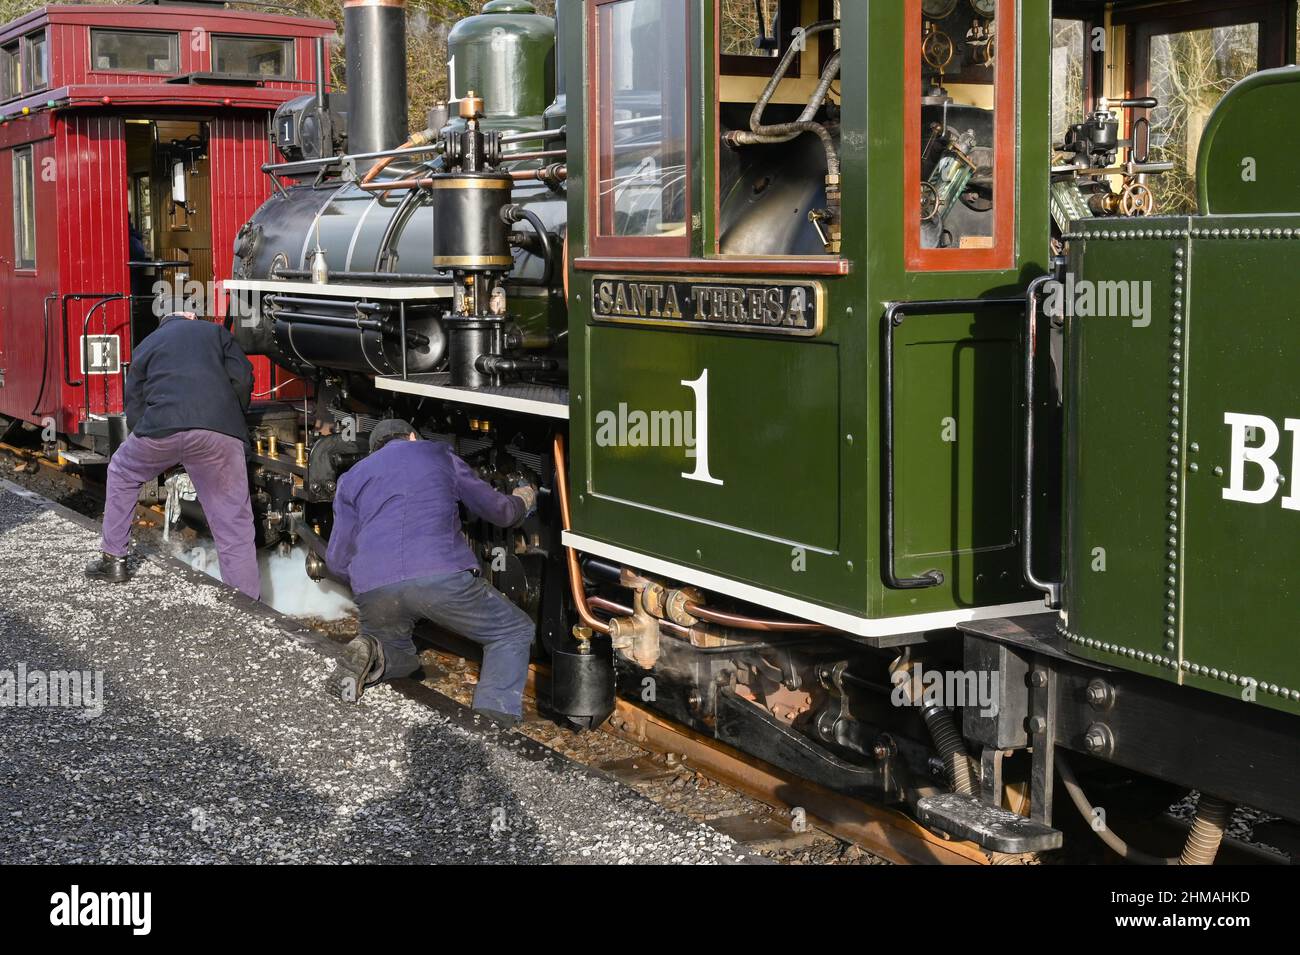 Merthyr Tydfil, Wales - December 2021: Train crew oiling wheels on a vintage steam engine on the narrow gauge railway of the Brecon Mountain Railway Stock Photo